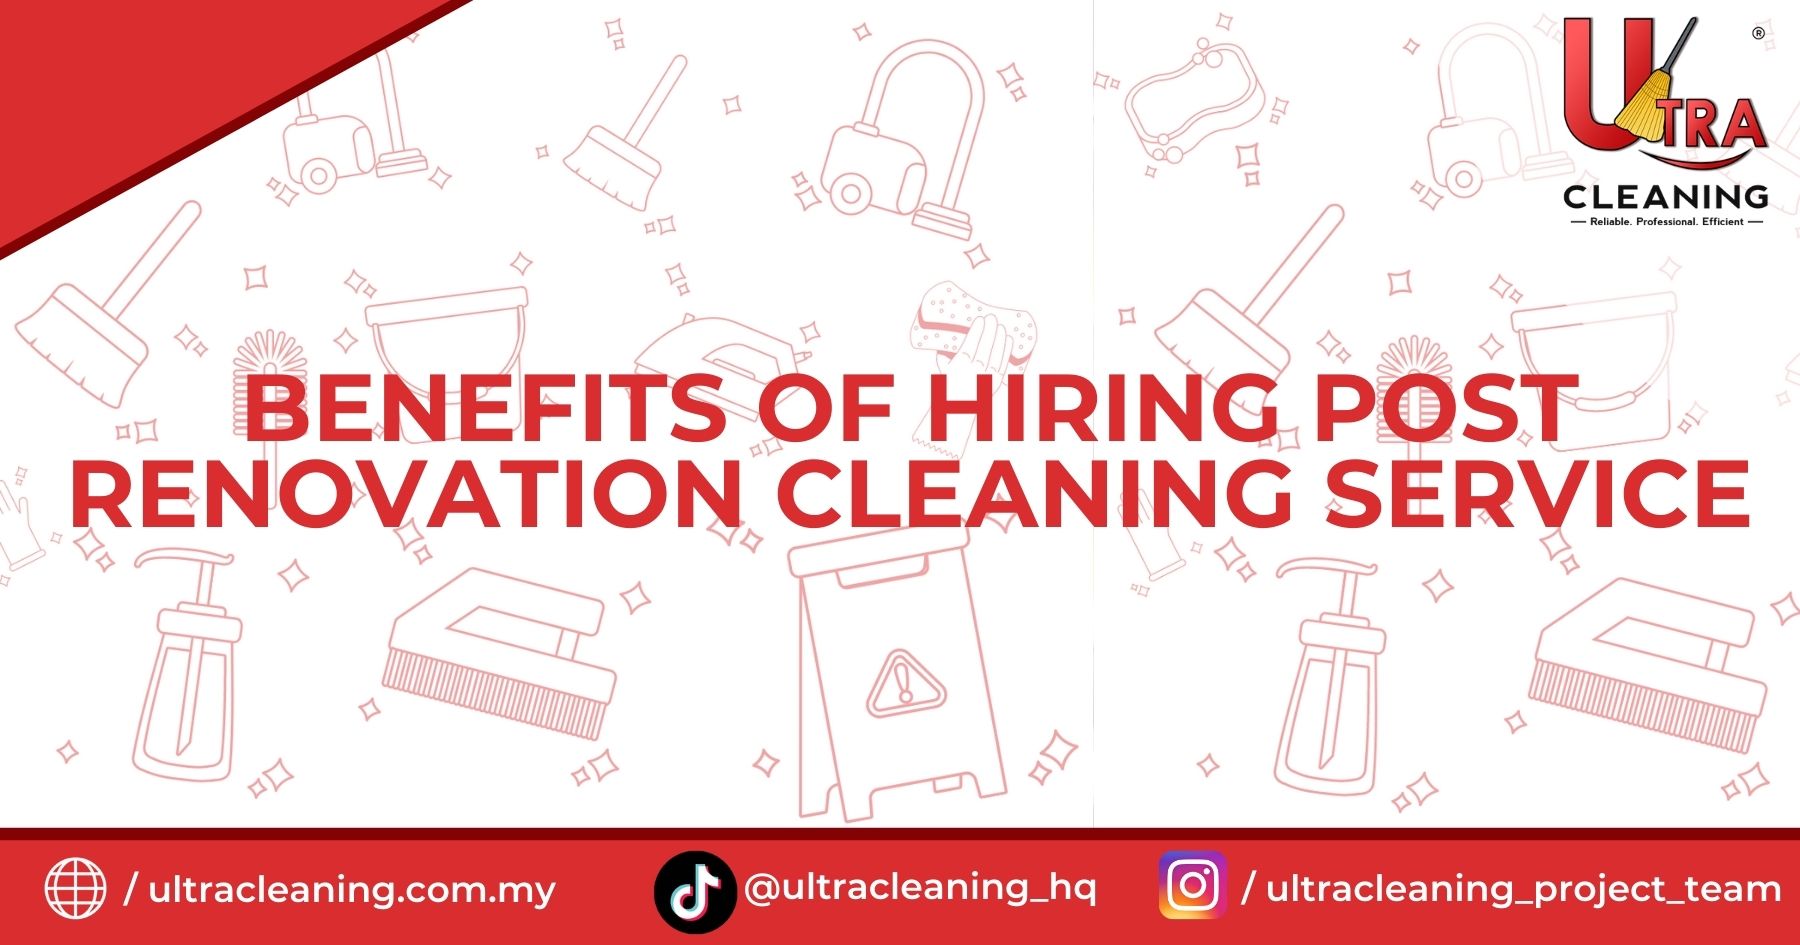 Benefits of Hiring Post Renovation Cleaning Service